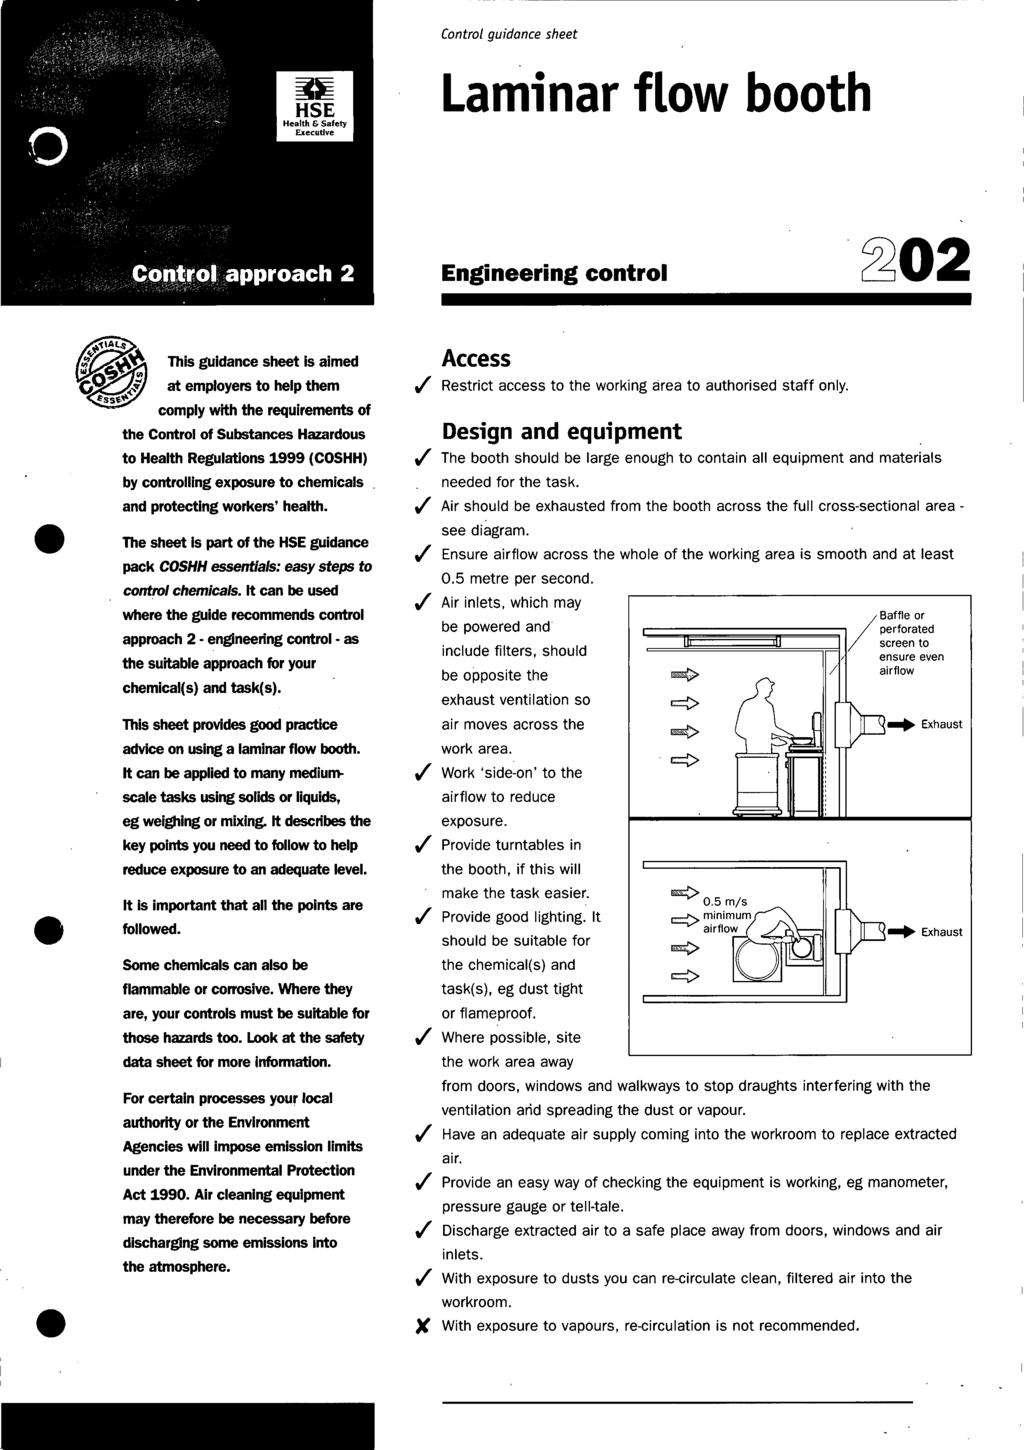 ~~~~ Control guidance sheet Laminar flow booth Engineering control 2202 This guidance sheet is aimed at employers to help them comply with the requirements of the Control of Substances Hazardous to